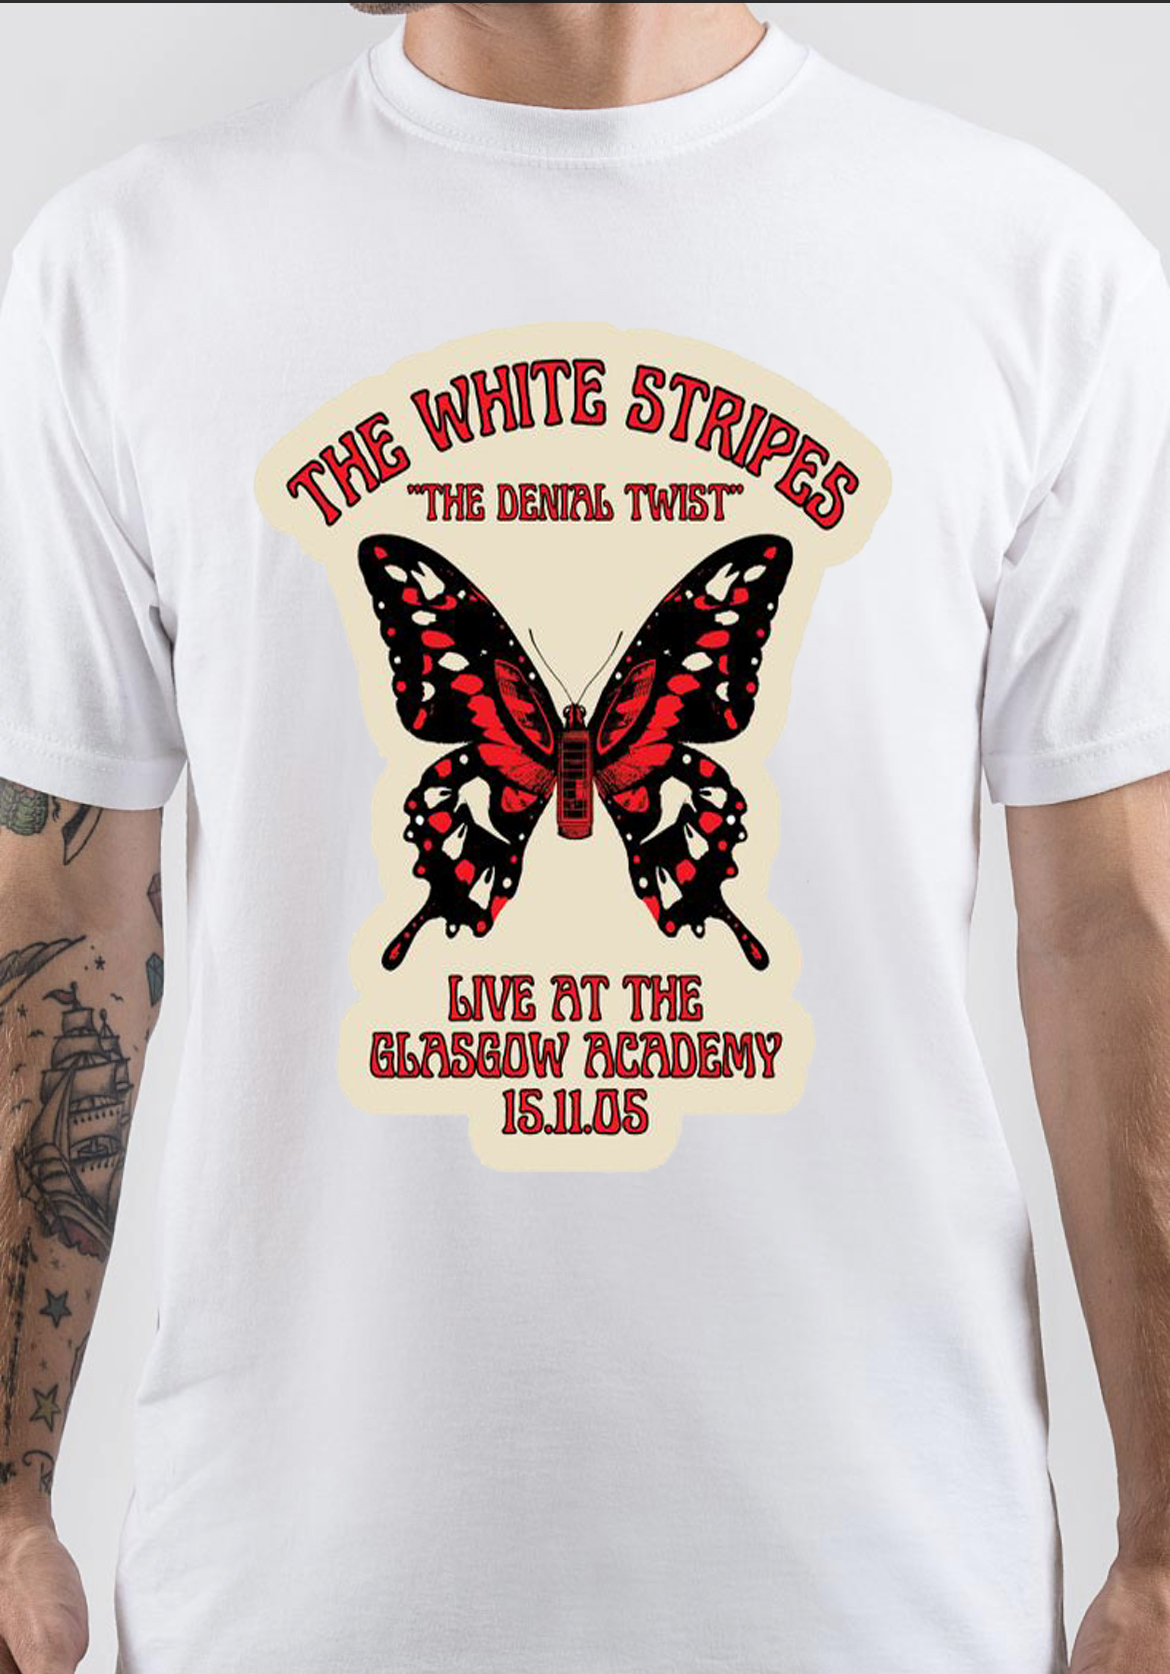 The White Stripes T-Shirt And Merchandise